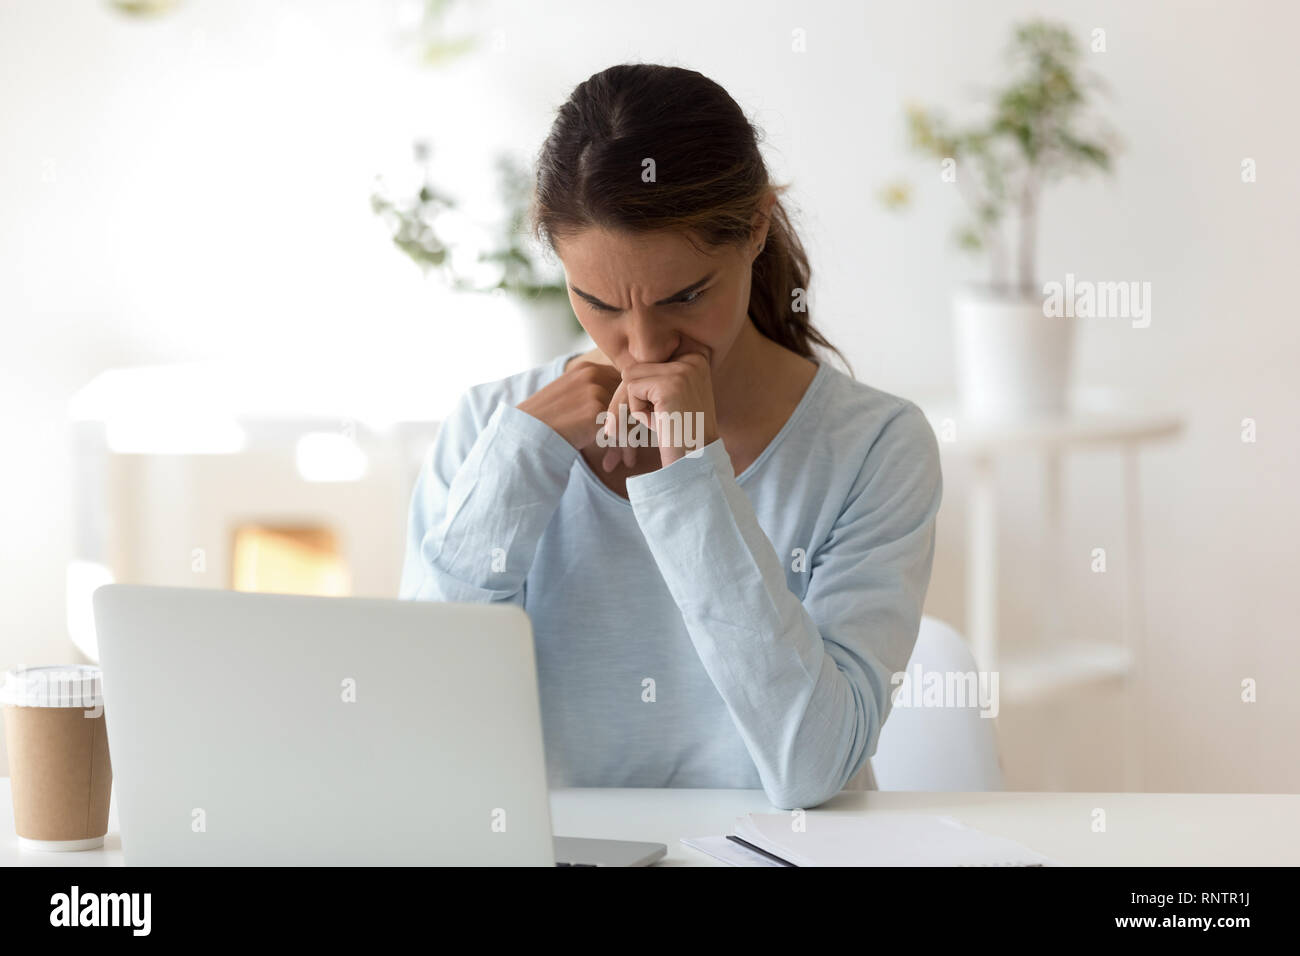 Gloomy young woman sitting at desk looking at computer screen Stock Photo